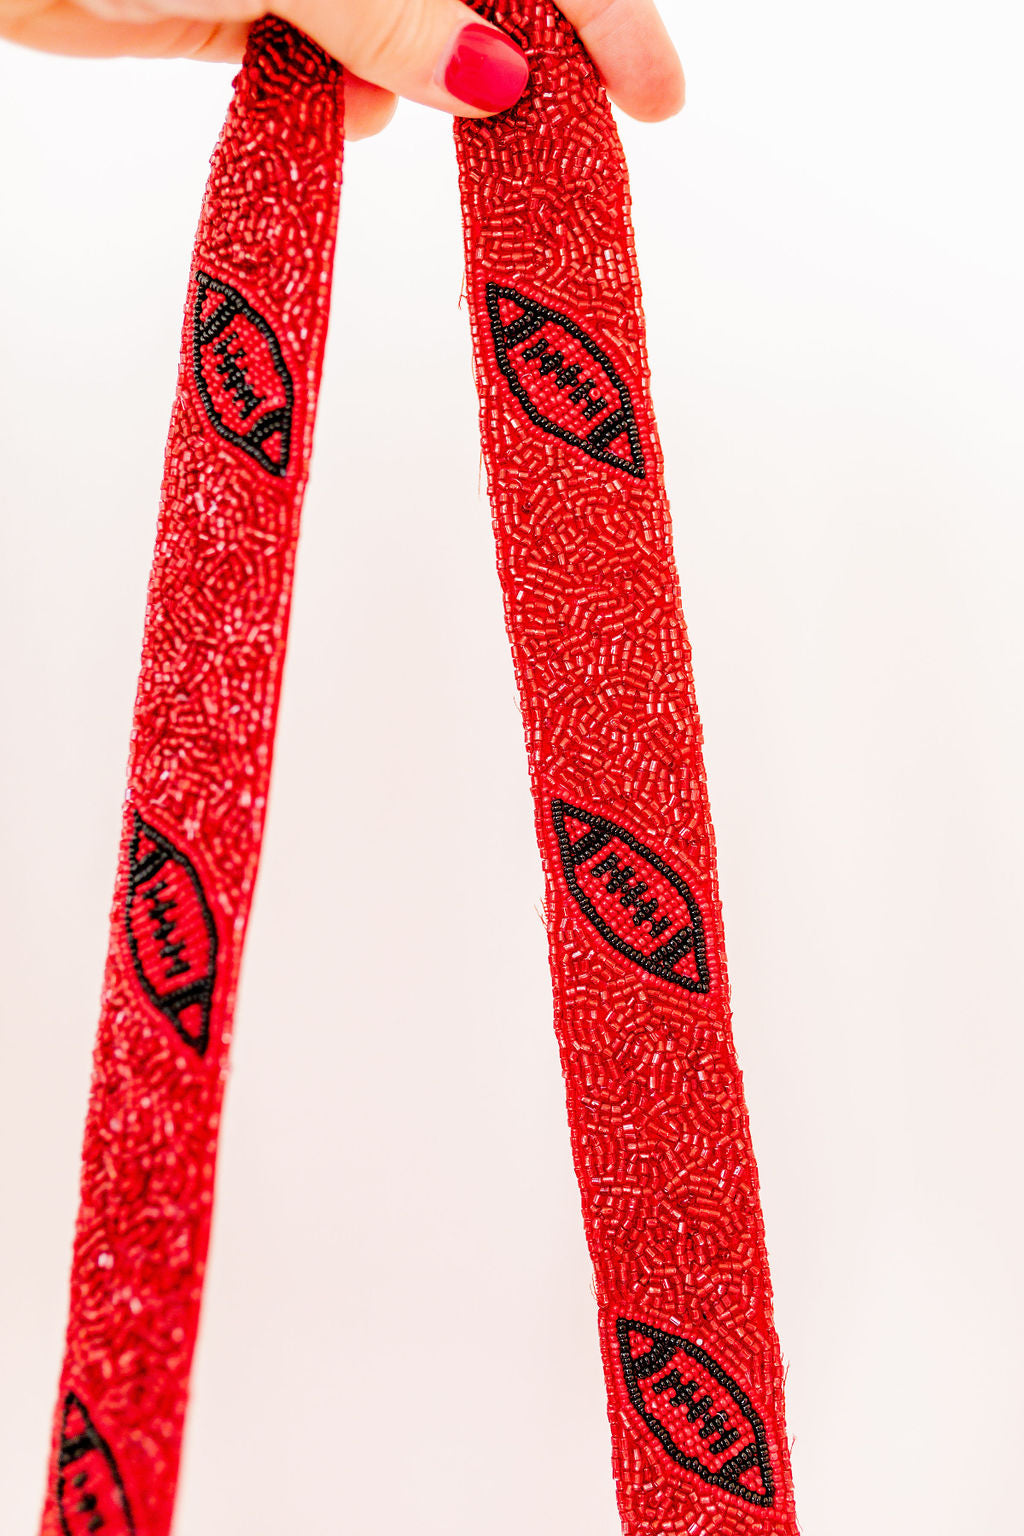 Beaded Bag Strap - Game Day!